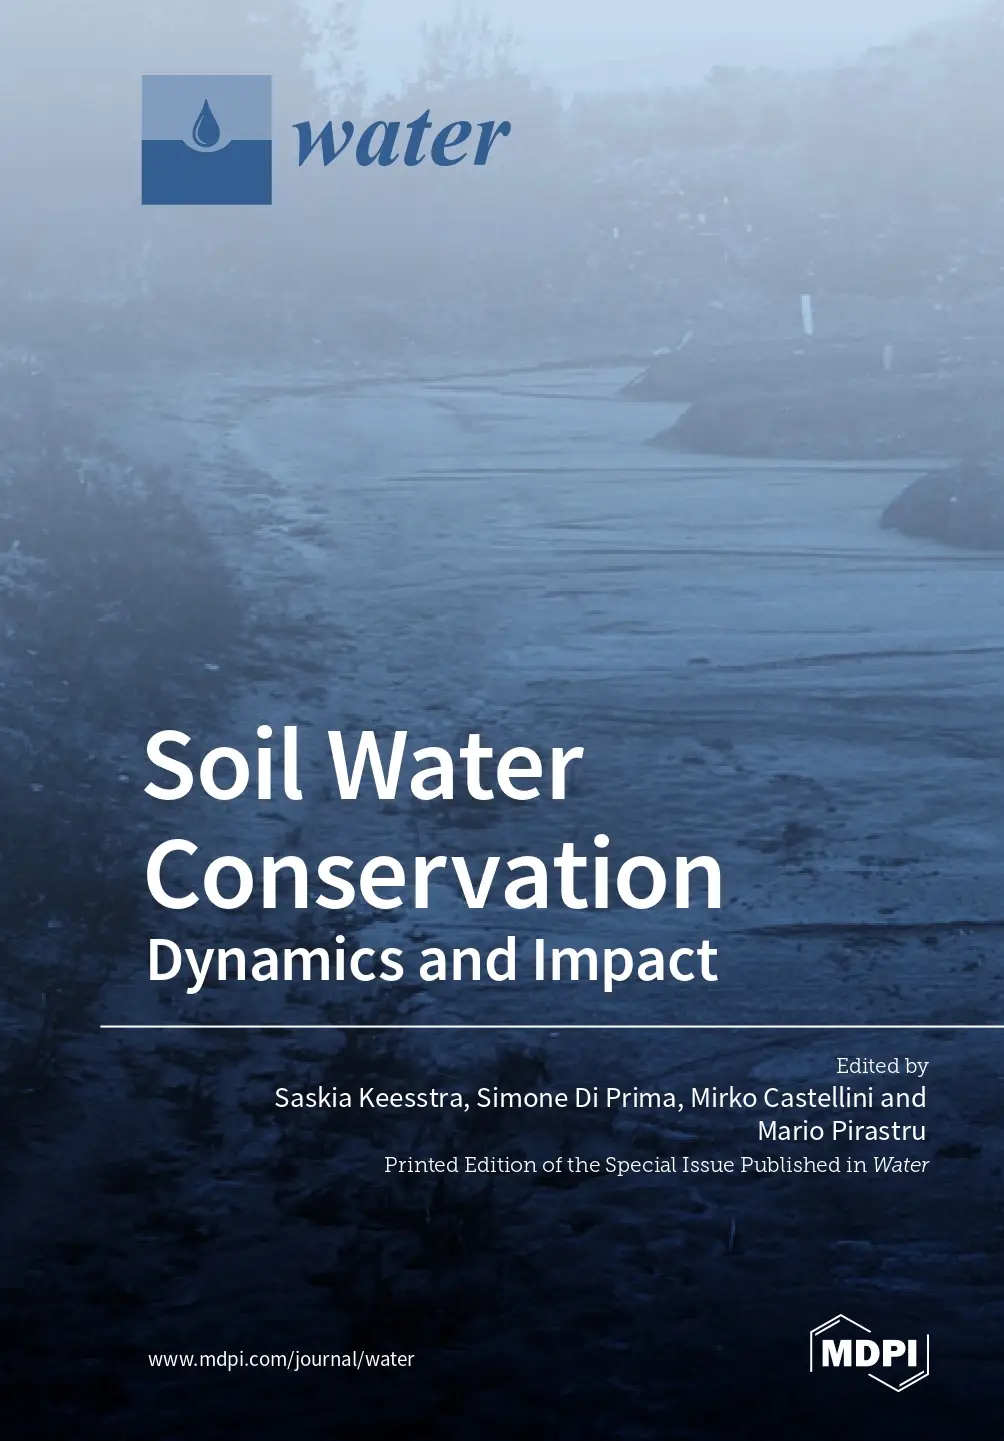 Soil Water Conservation Dynamics and Impact